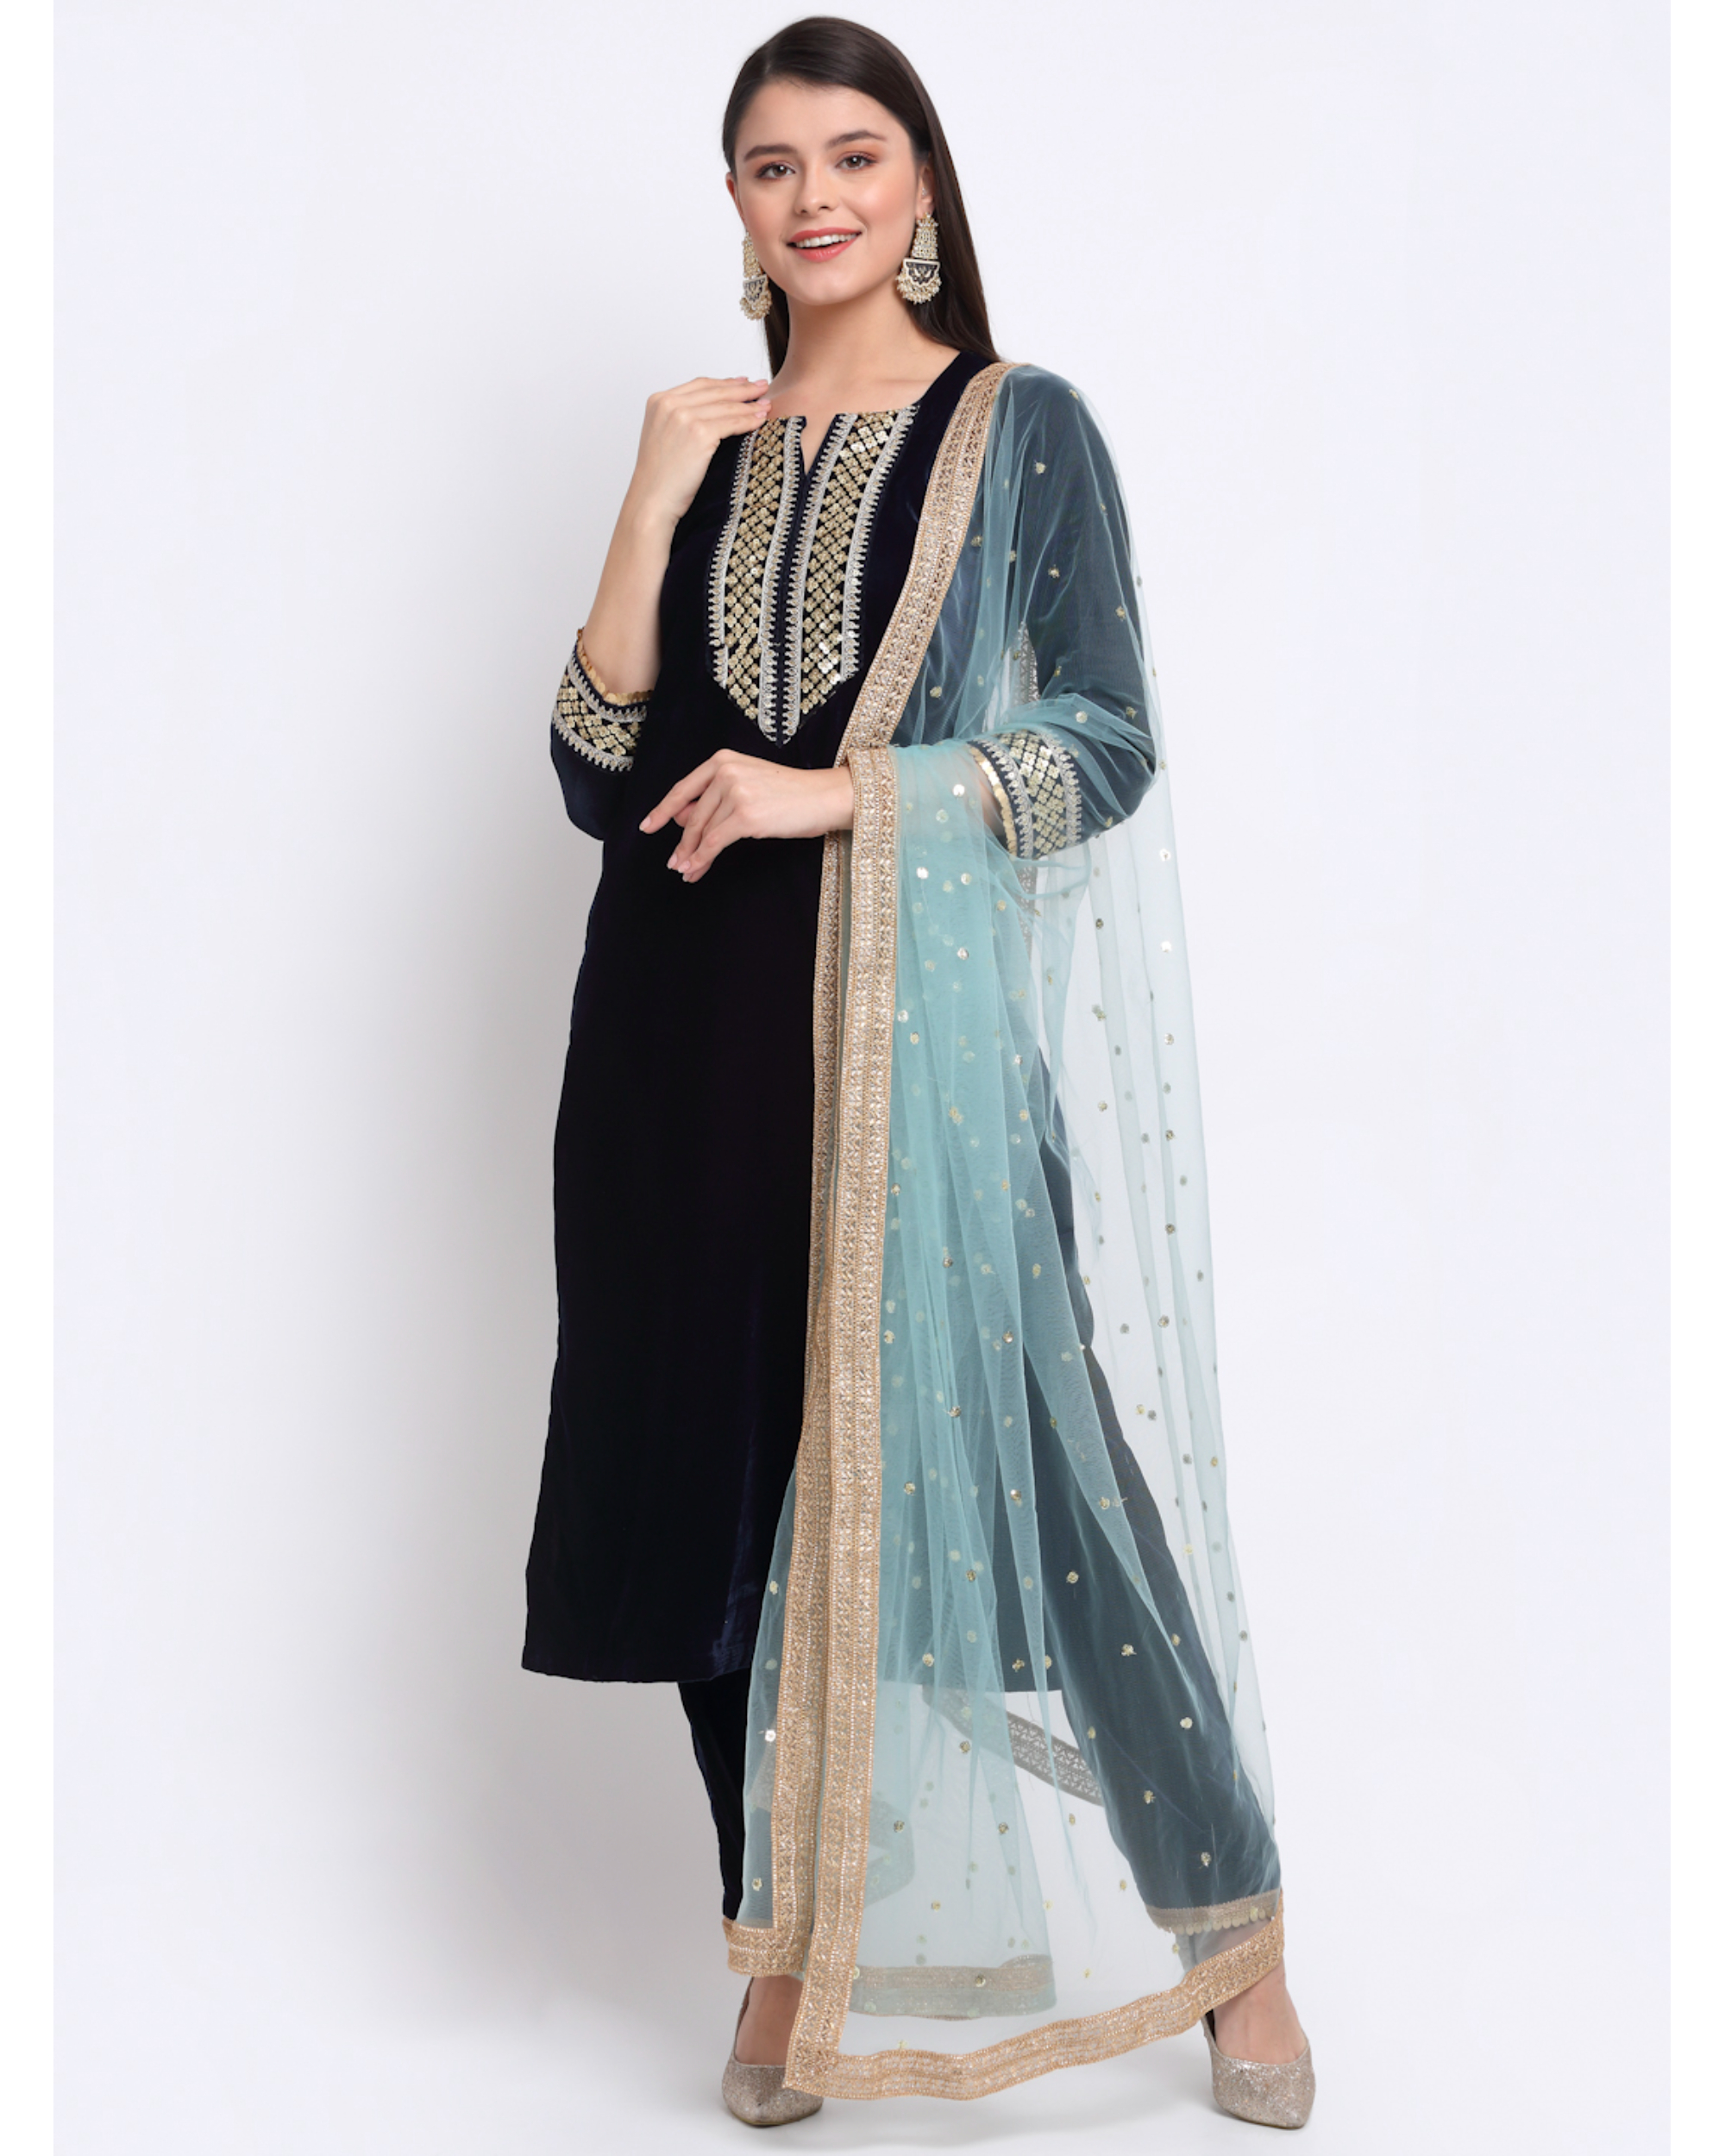 Imara Sea Green & White Embroidered Kurta Leggings Set With Dupatta Price  in India, Full Specifications & Offers | DTashion.com